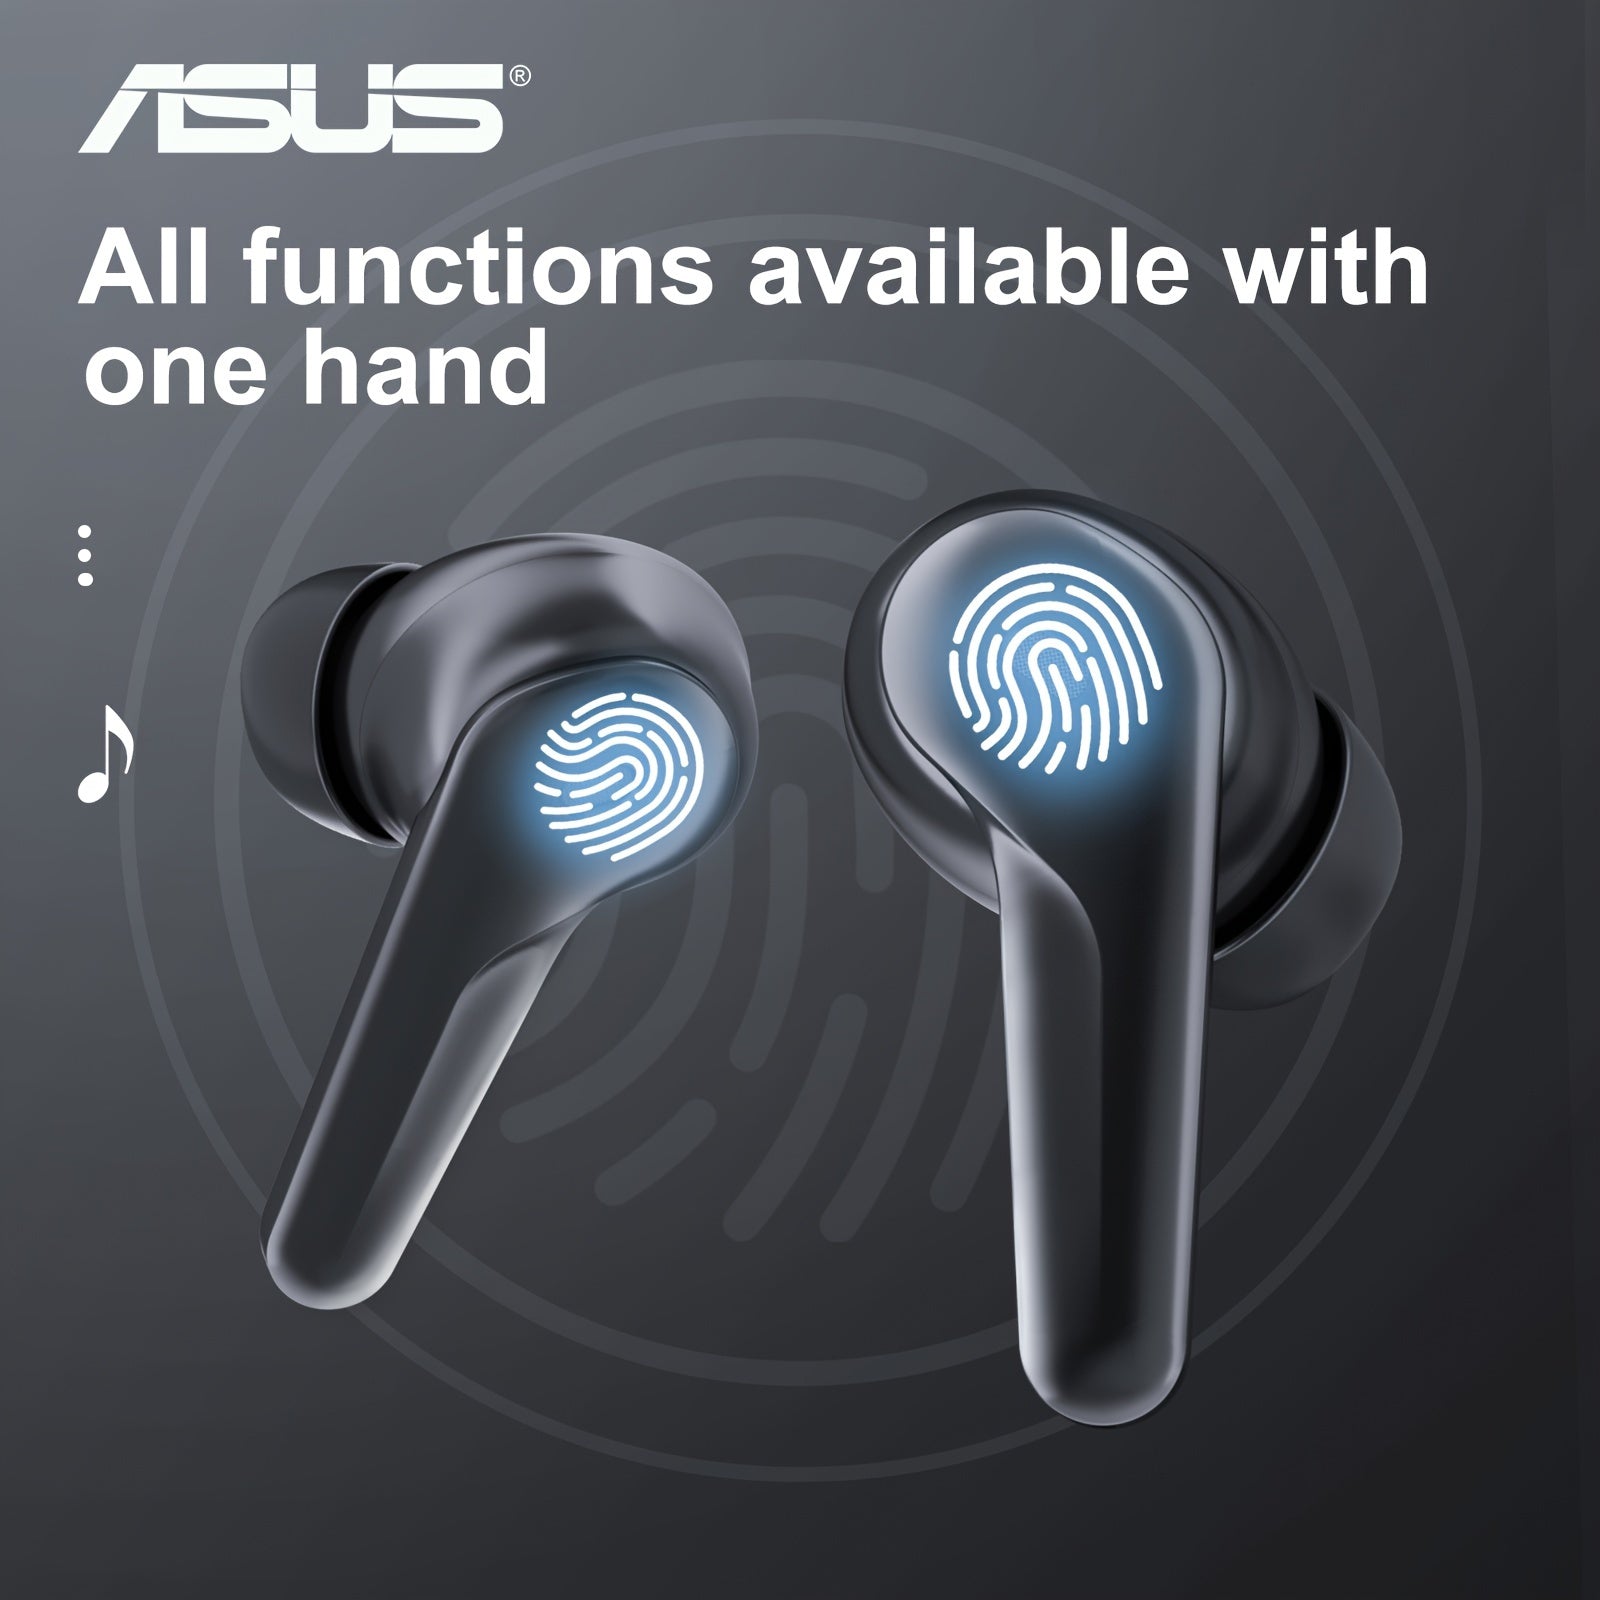 Asus wireless headphones carry a microphone with lossless sound quality